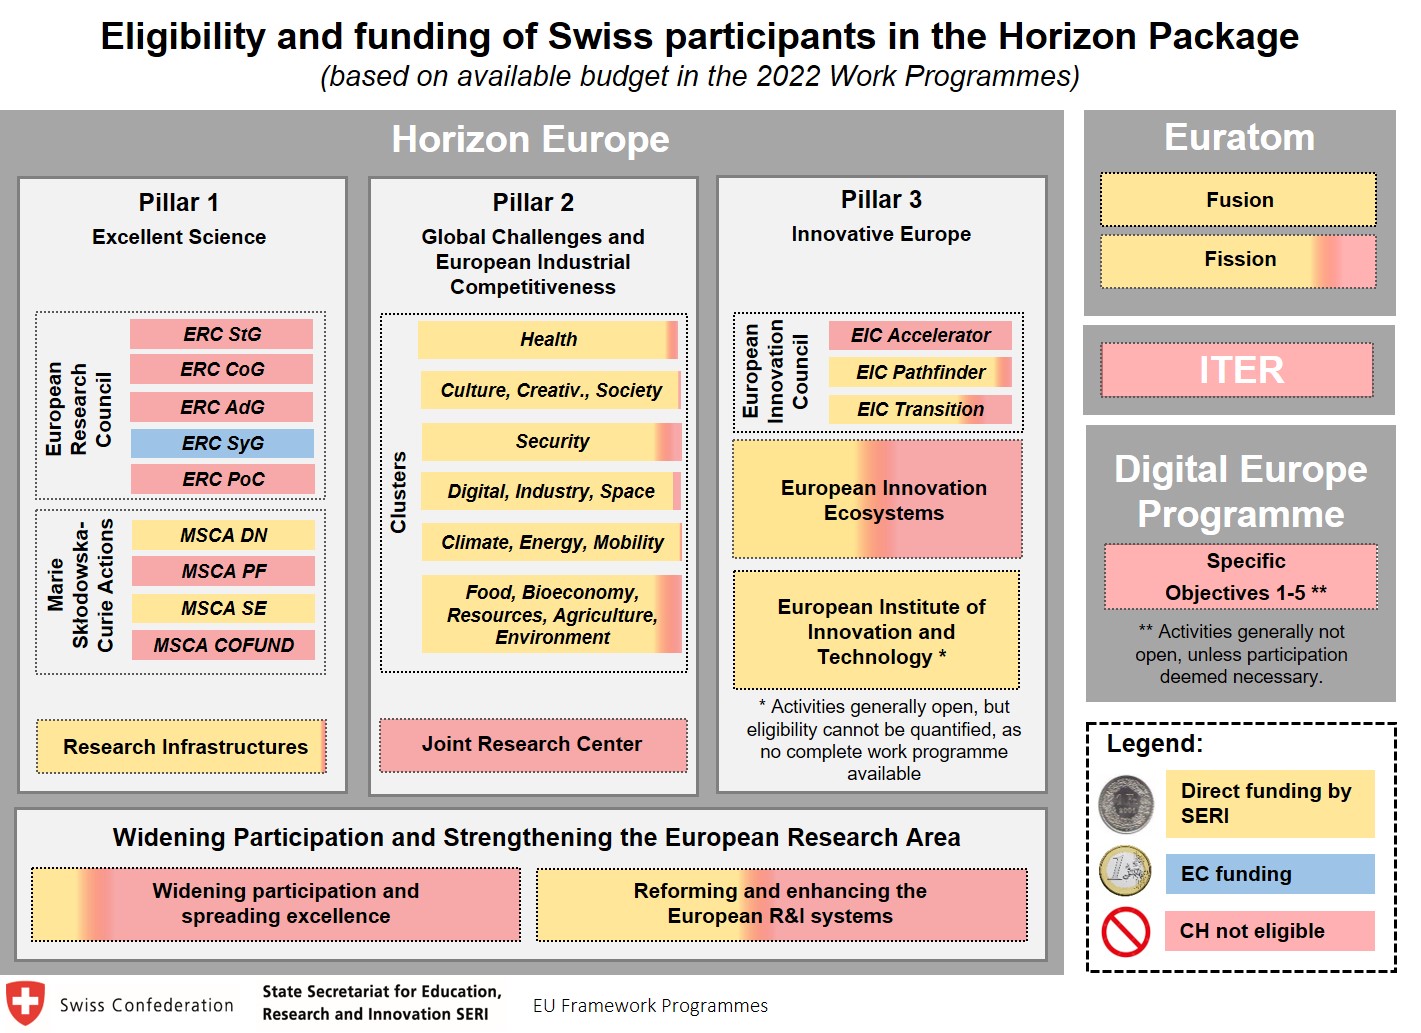 Overview of eligibility and funding for Swiss participants in the 2022 calls